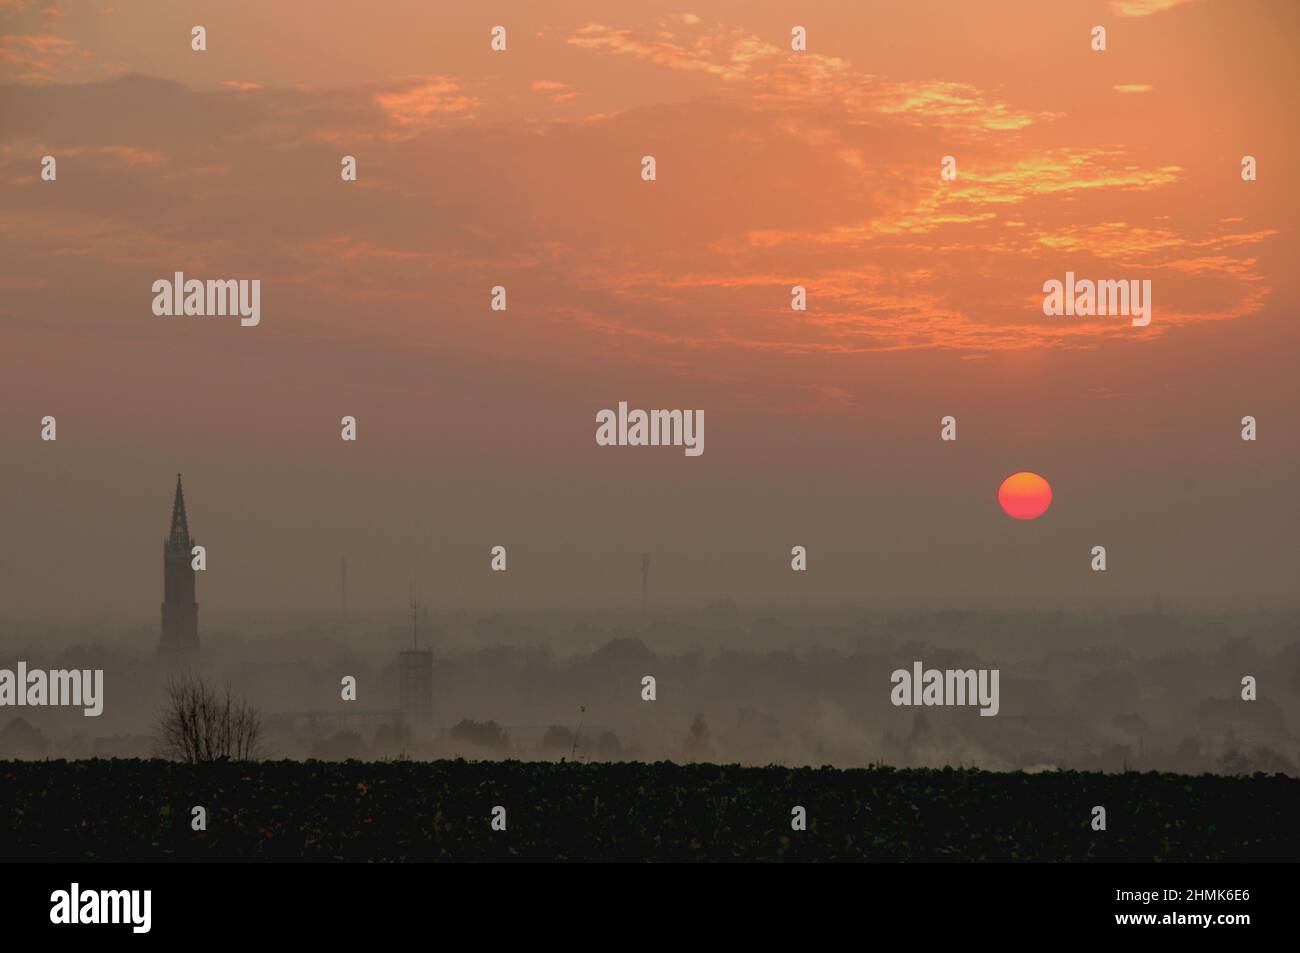 Sunset over the city shrouded in smog. Stock Photo